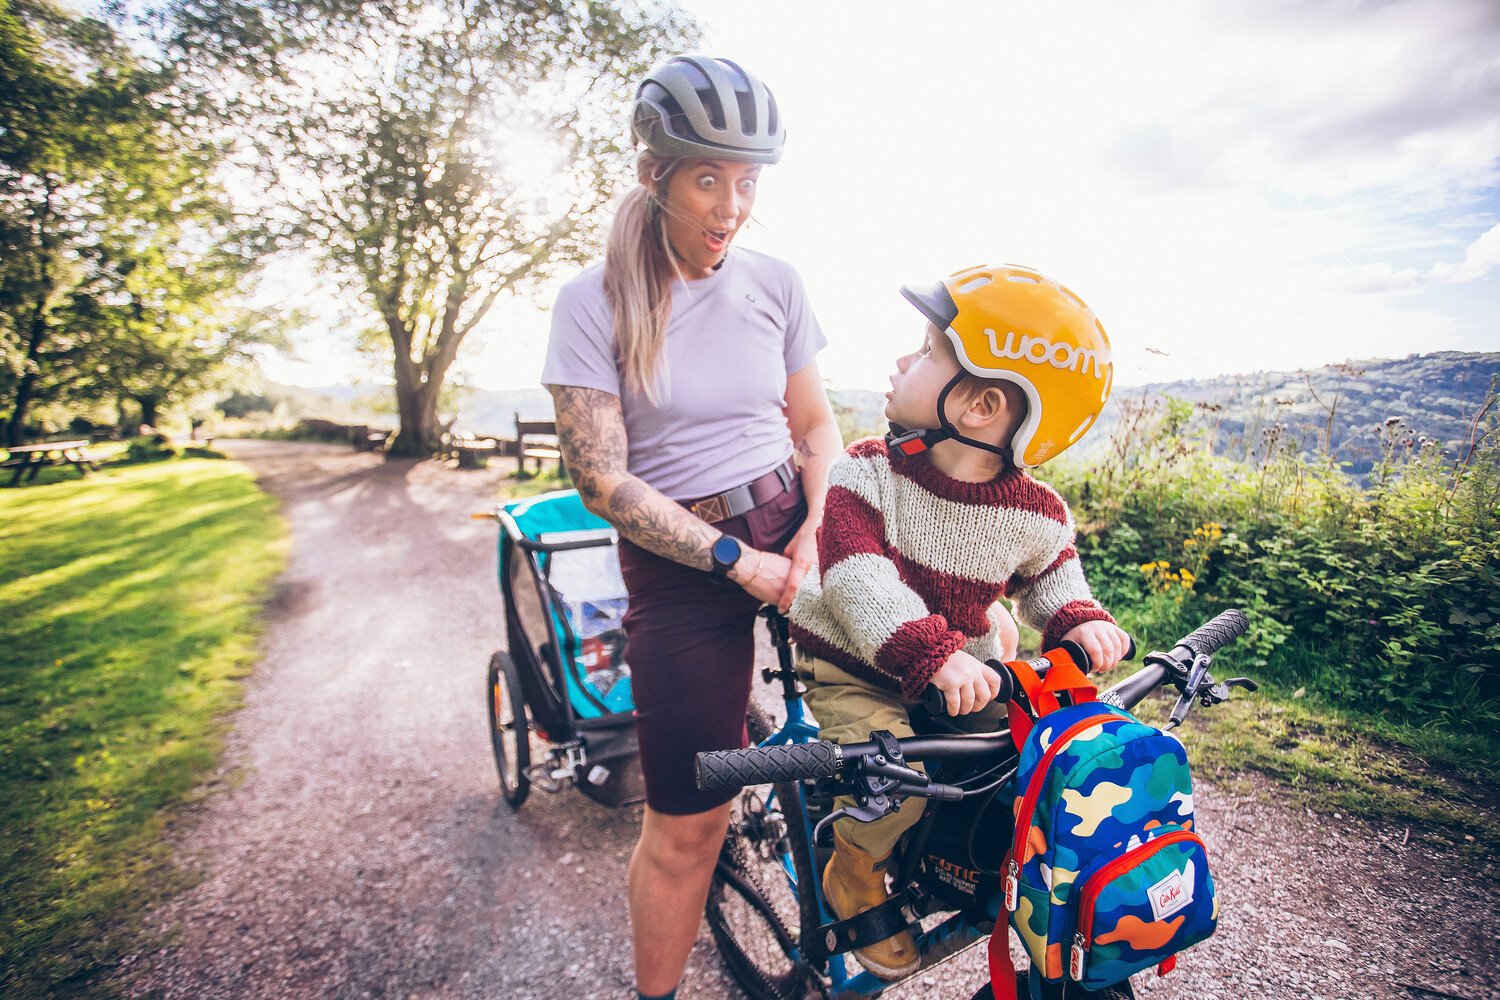 A young boy in a yellow woom helmet looks back at his mum from his seat on the front of her bike.